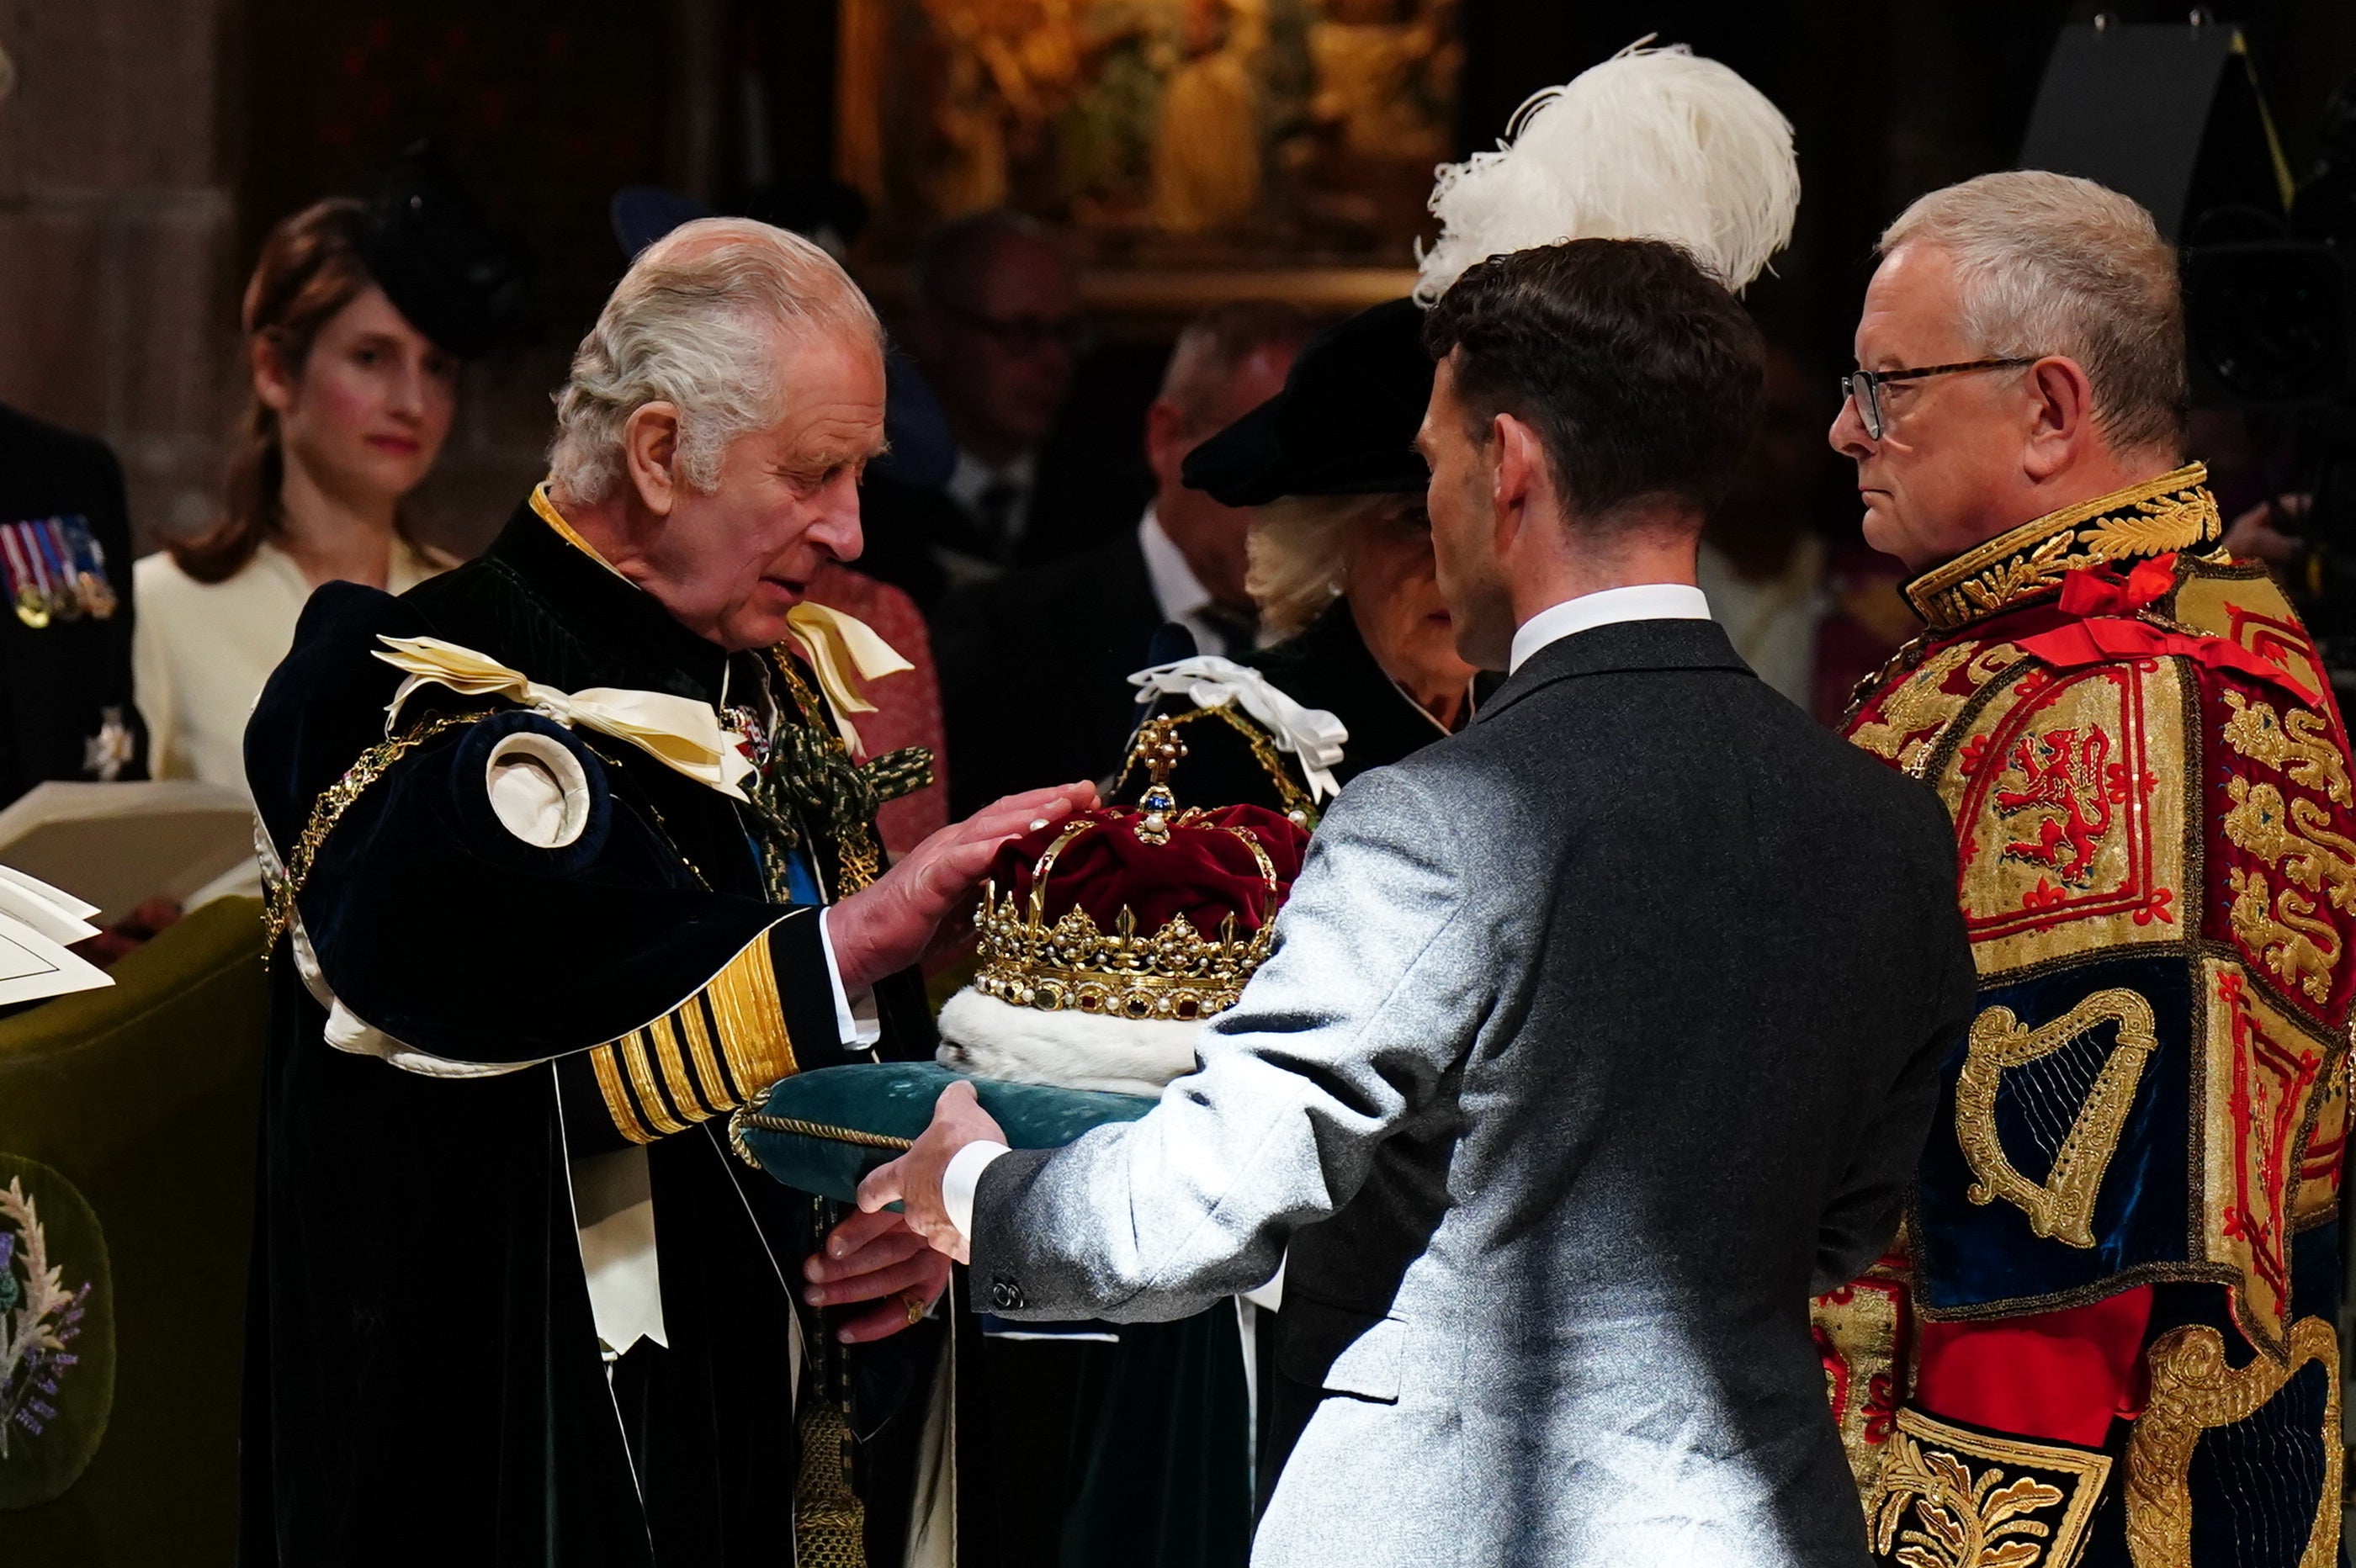 King Charles III is presented with the Crown of Scotland